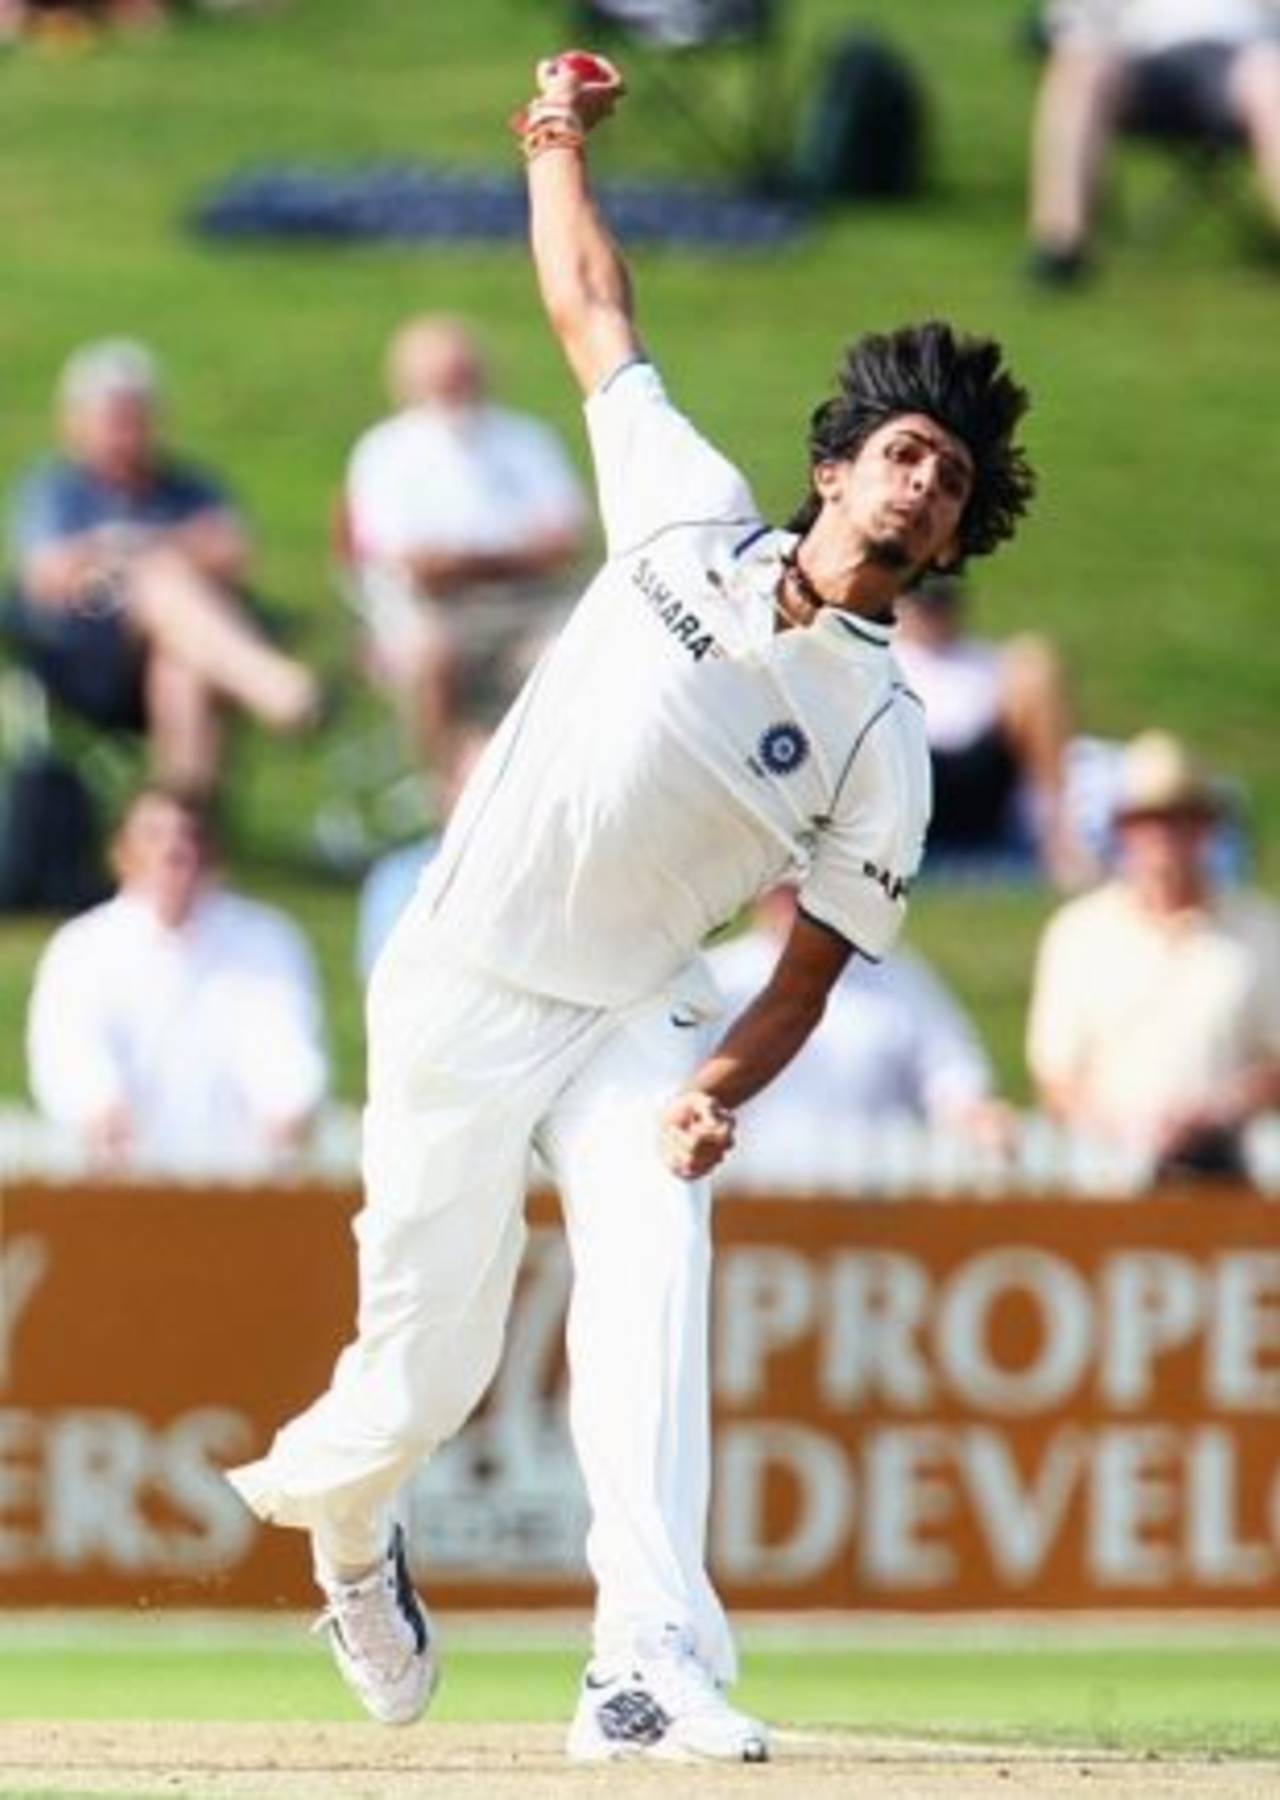 Ishant Sharma bowled a destructive second spell with the wind behind him and the ball moving in dangerously&nbsp;&nbsp;&bull;&nbsp;&nbsp;Getty Images